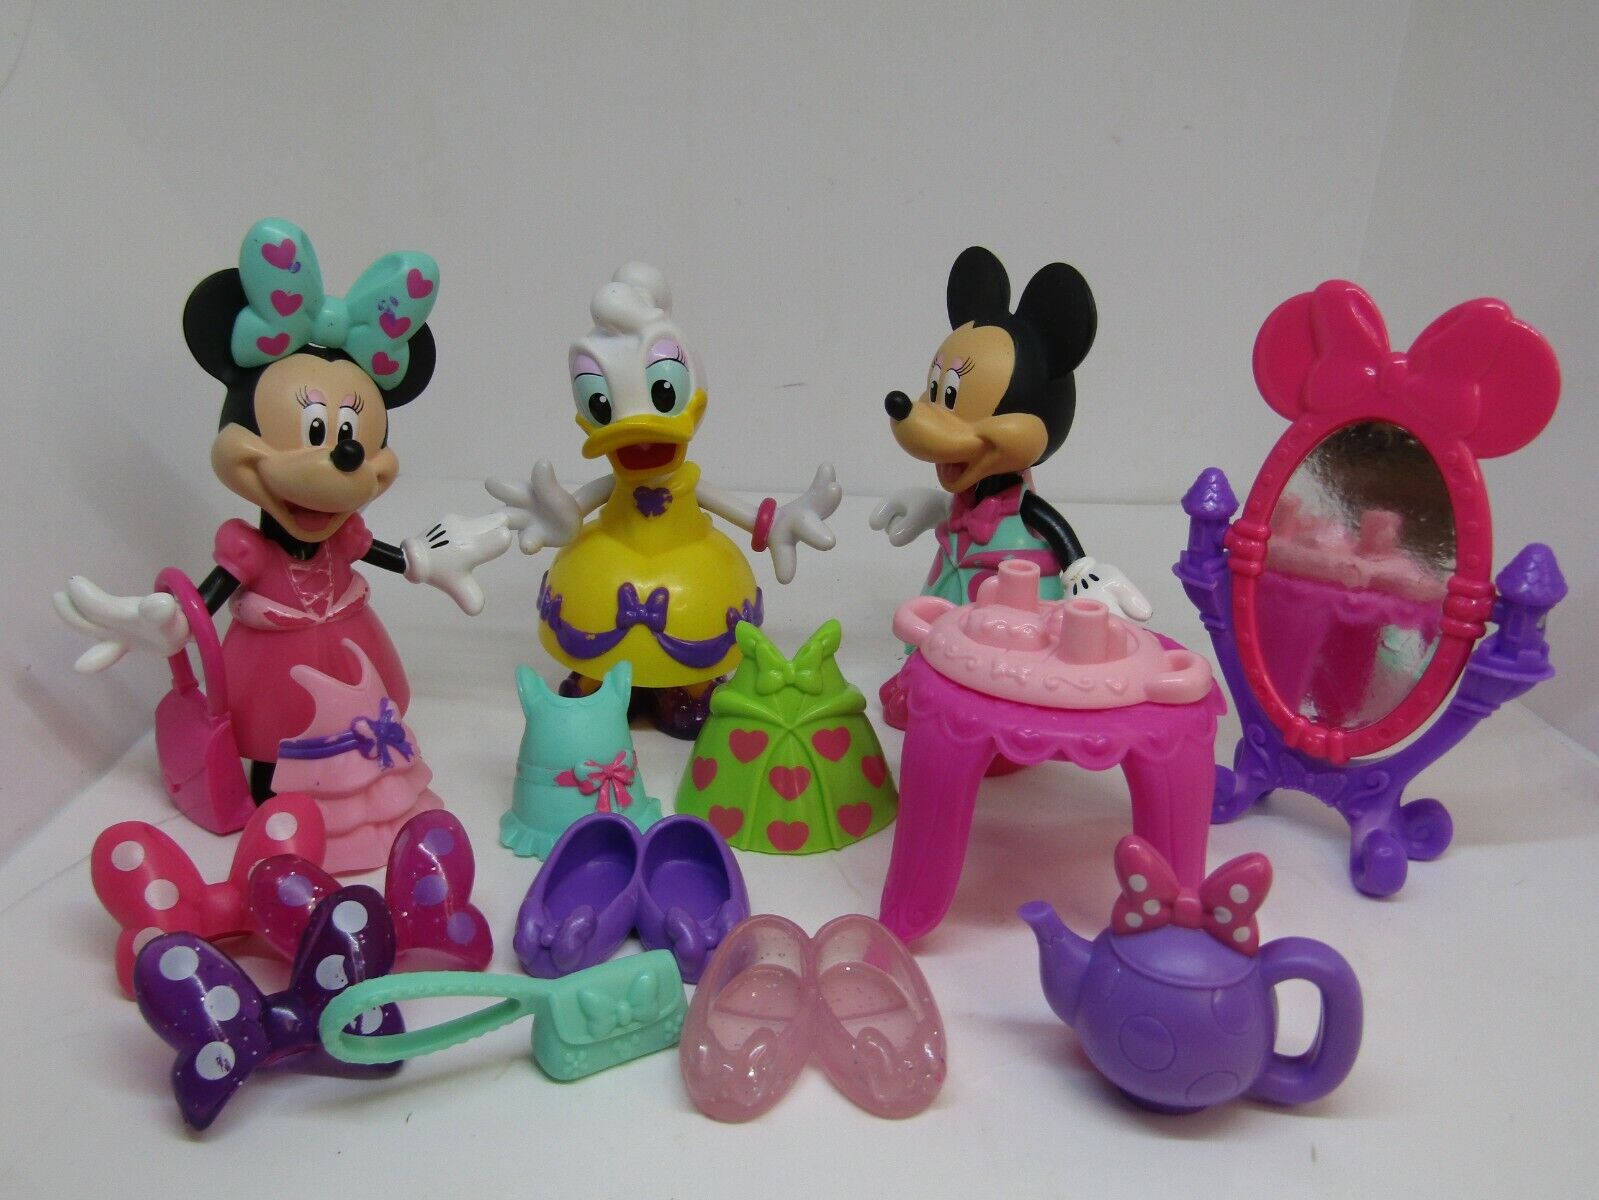 3 Minnie Mouse Daisy Duck Boutique Dolls with Snap on Clothes Shoes Bows Disney.